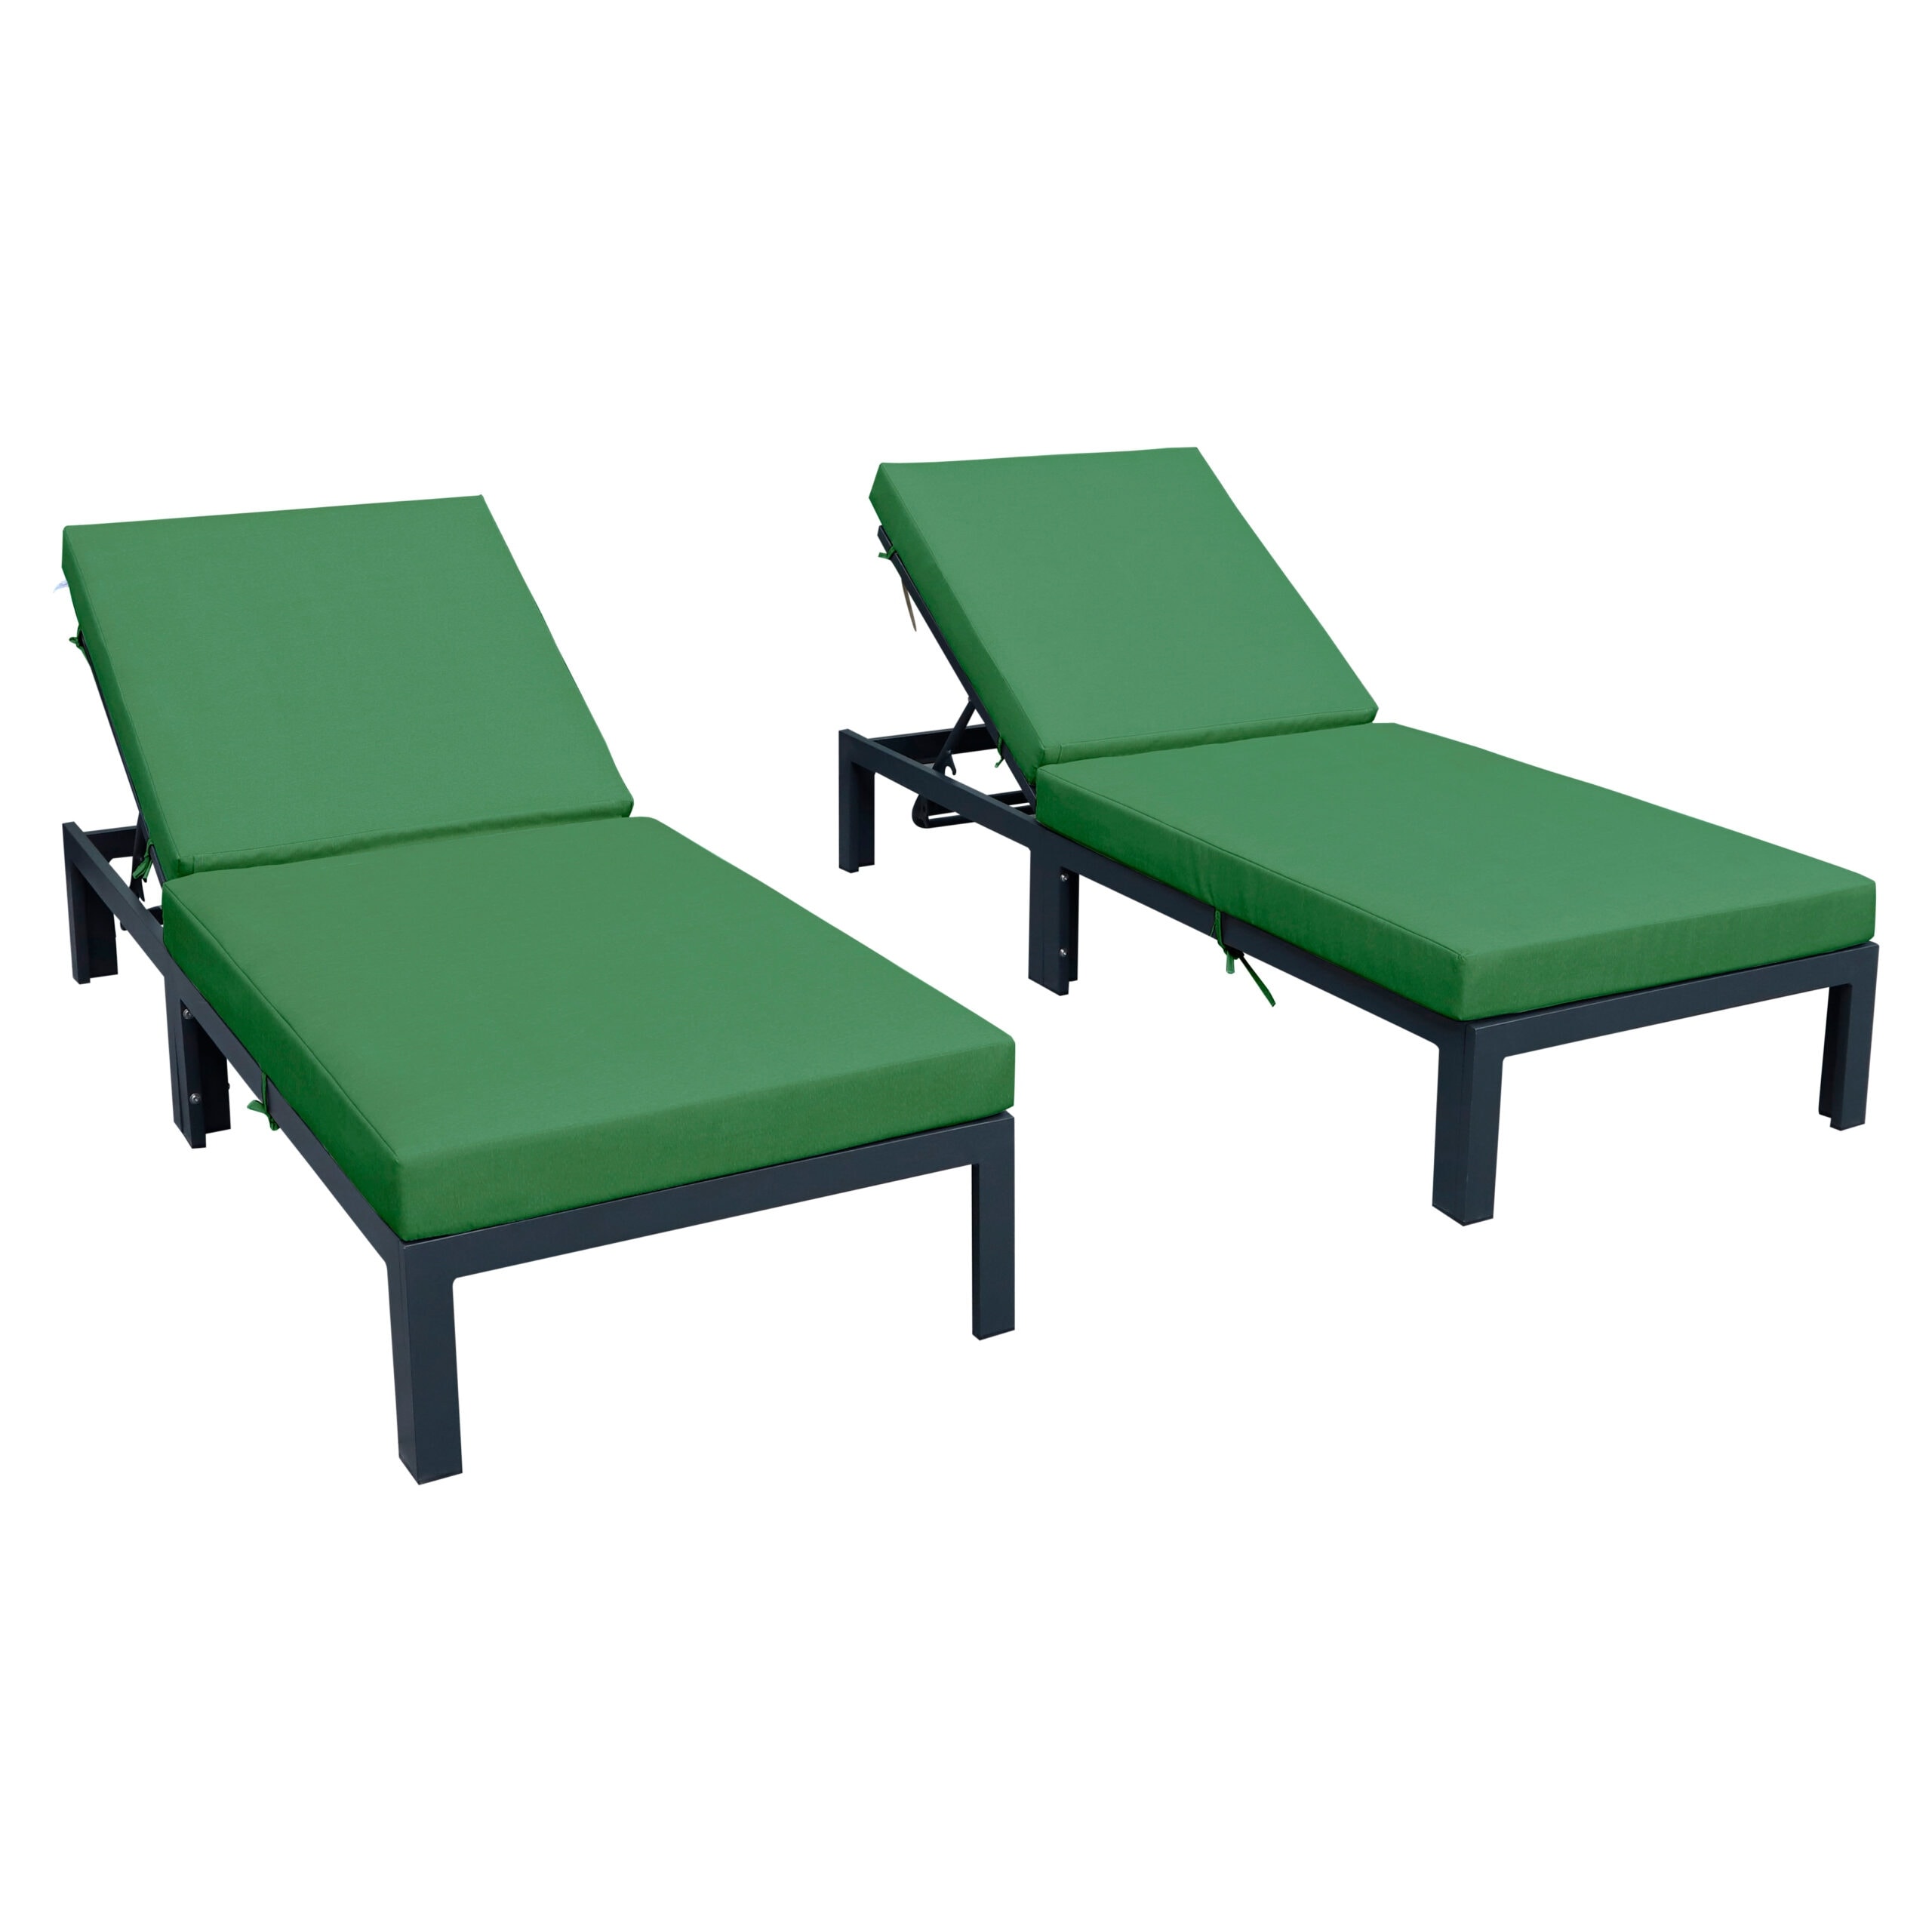 Leisuremod Chelsea Aluminum Chaise Lounge Chair With Cushions Set Of 2